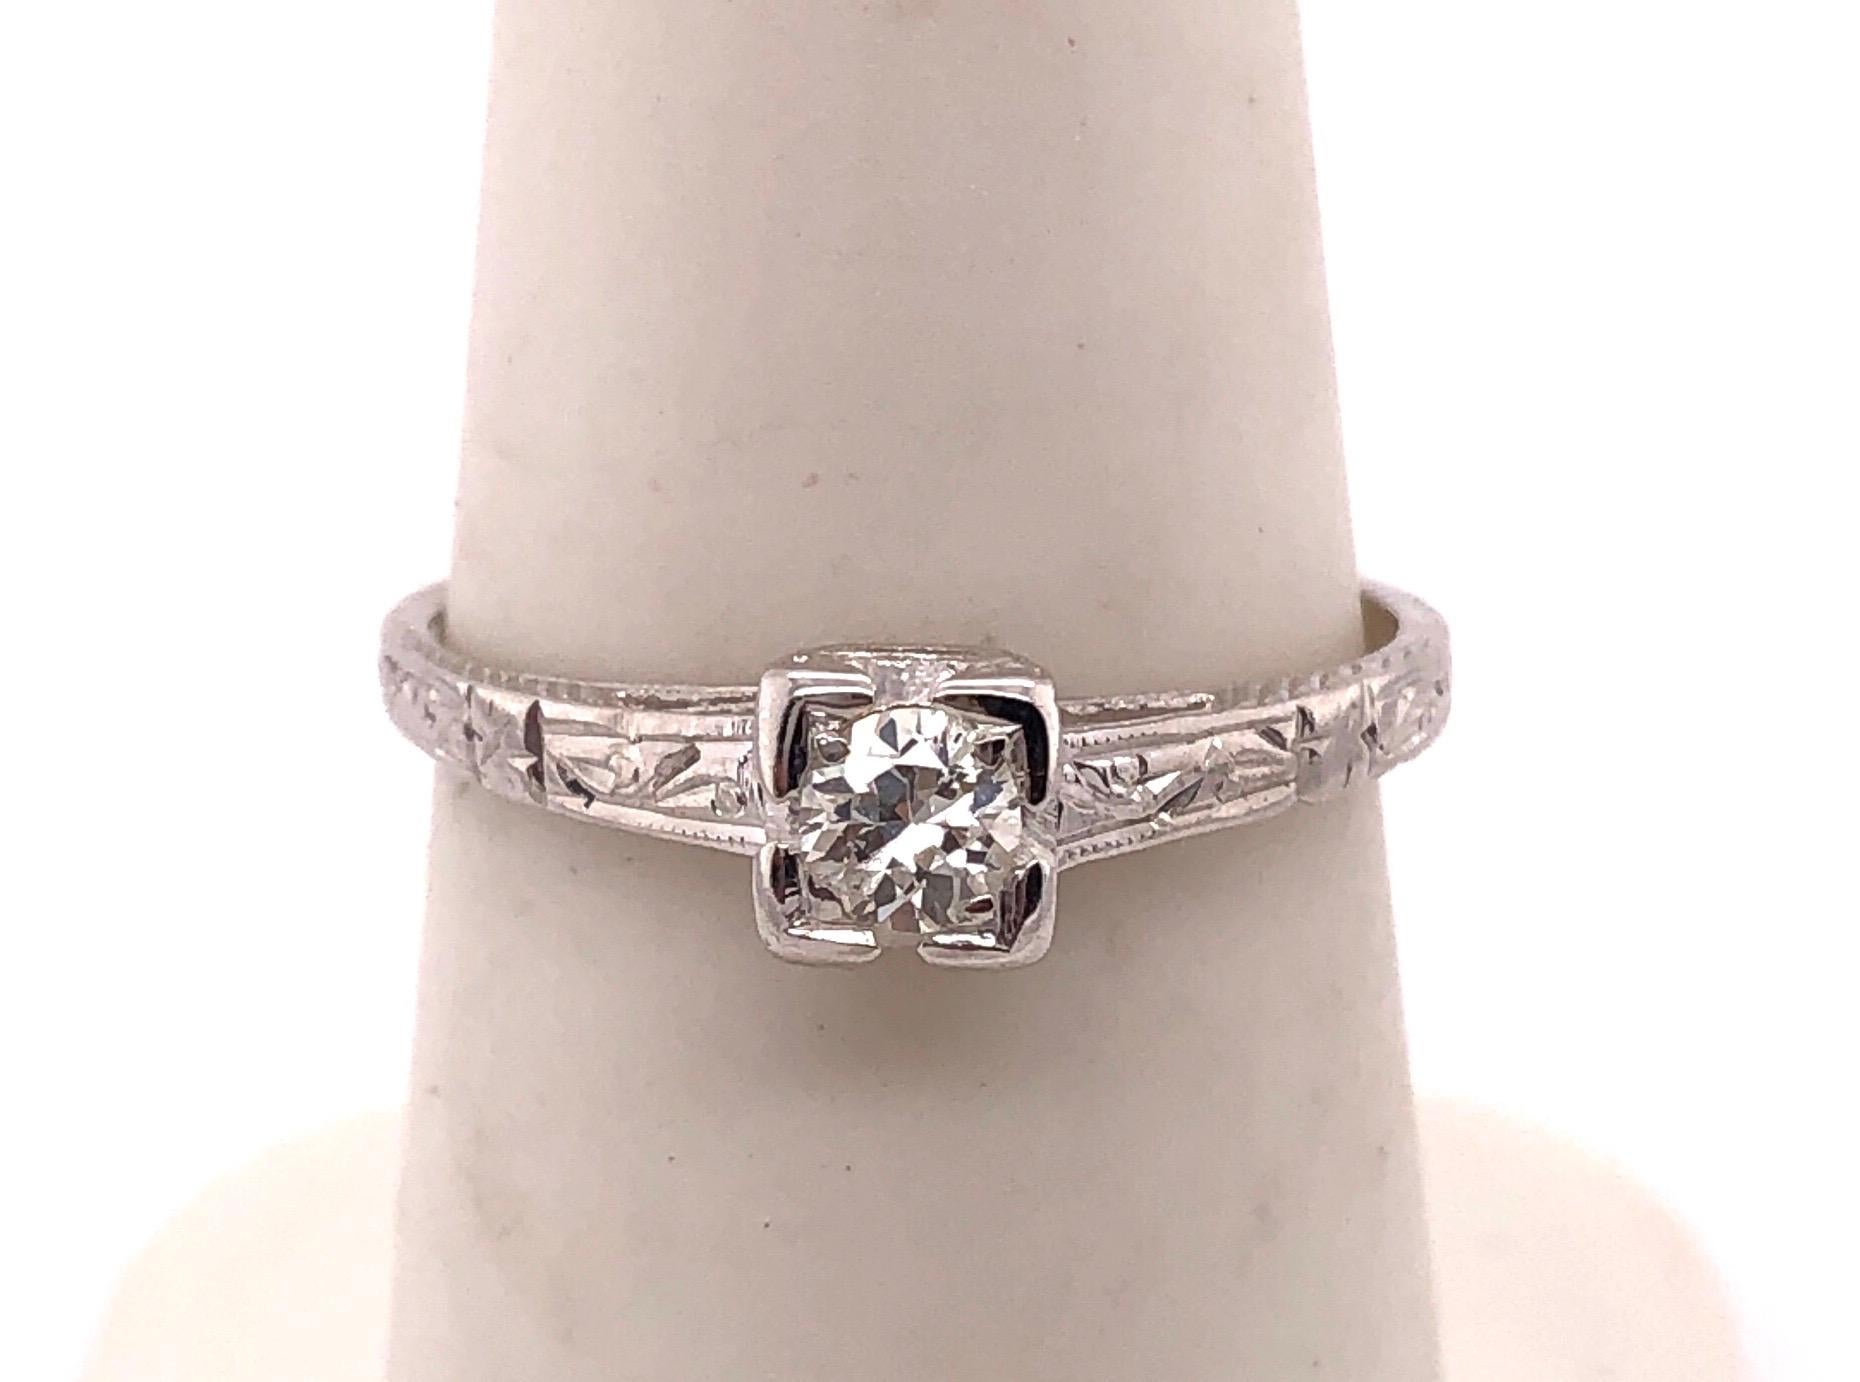 18K White Gold Engagement Ring/Bridal Ring 
0.25 Total Diamond Weight.
Size 6.5
2.00 grams total weight.